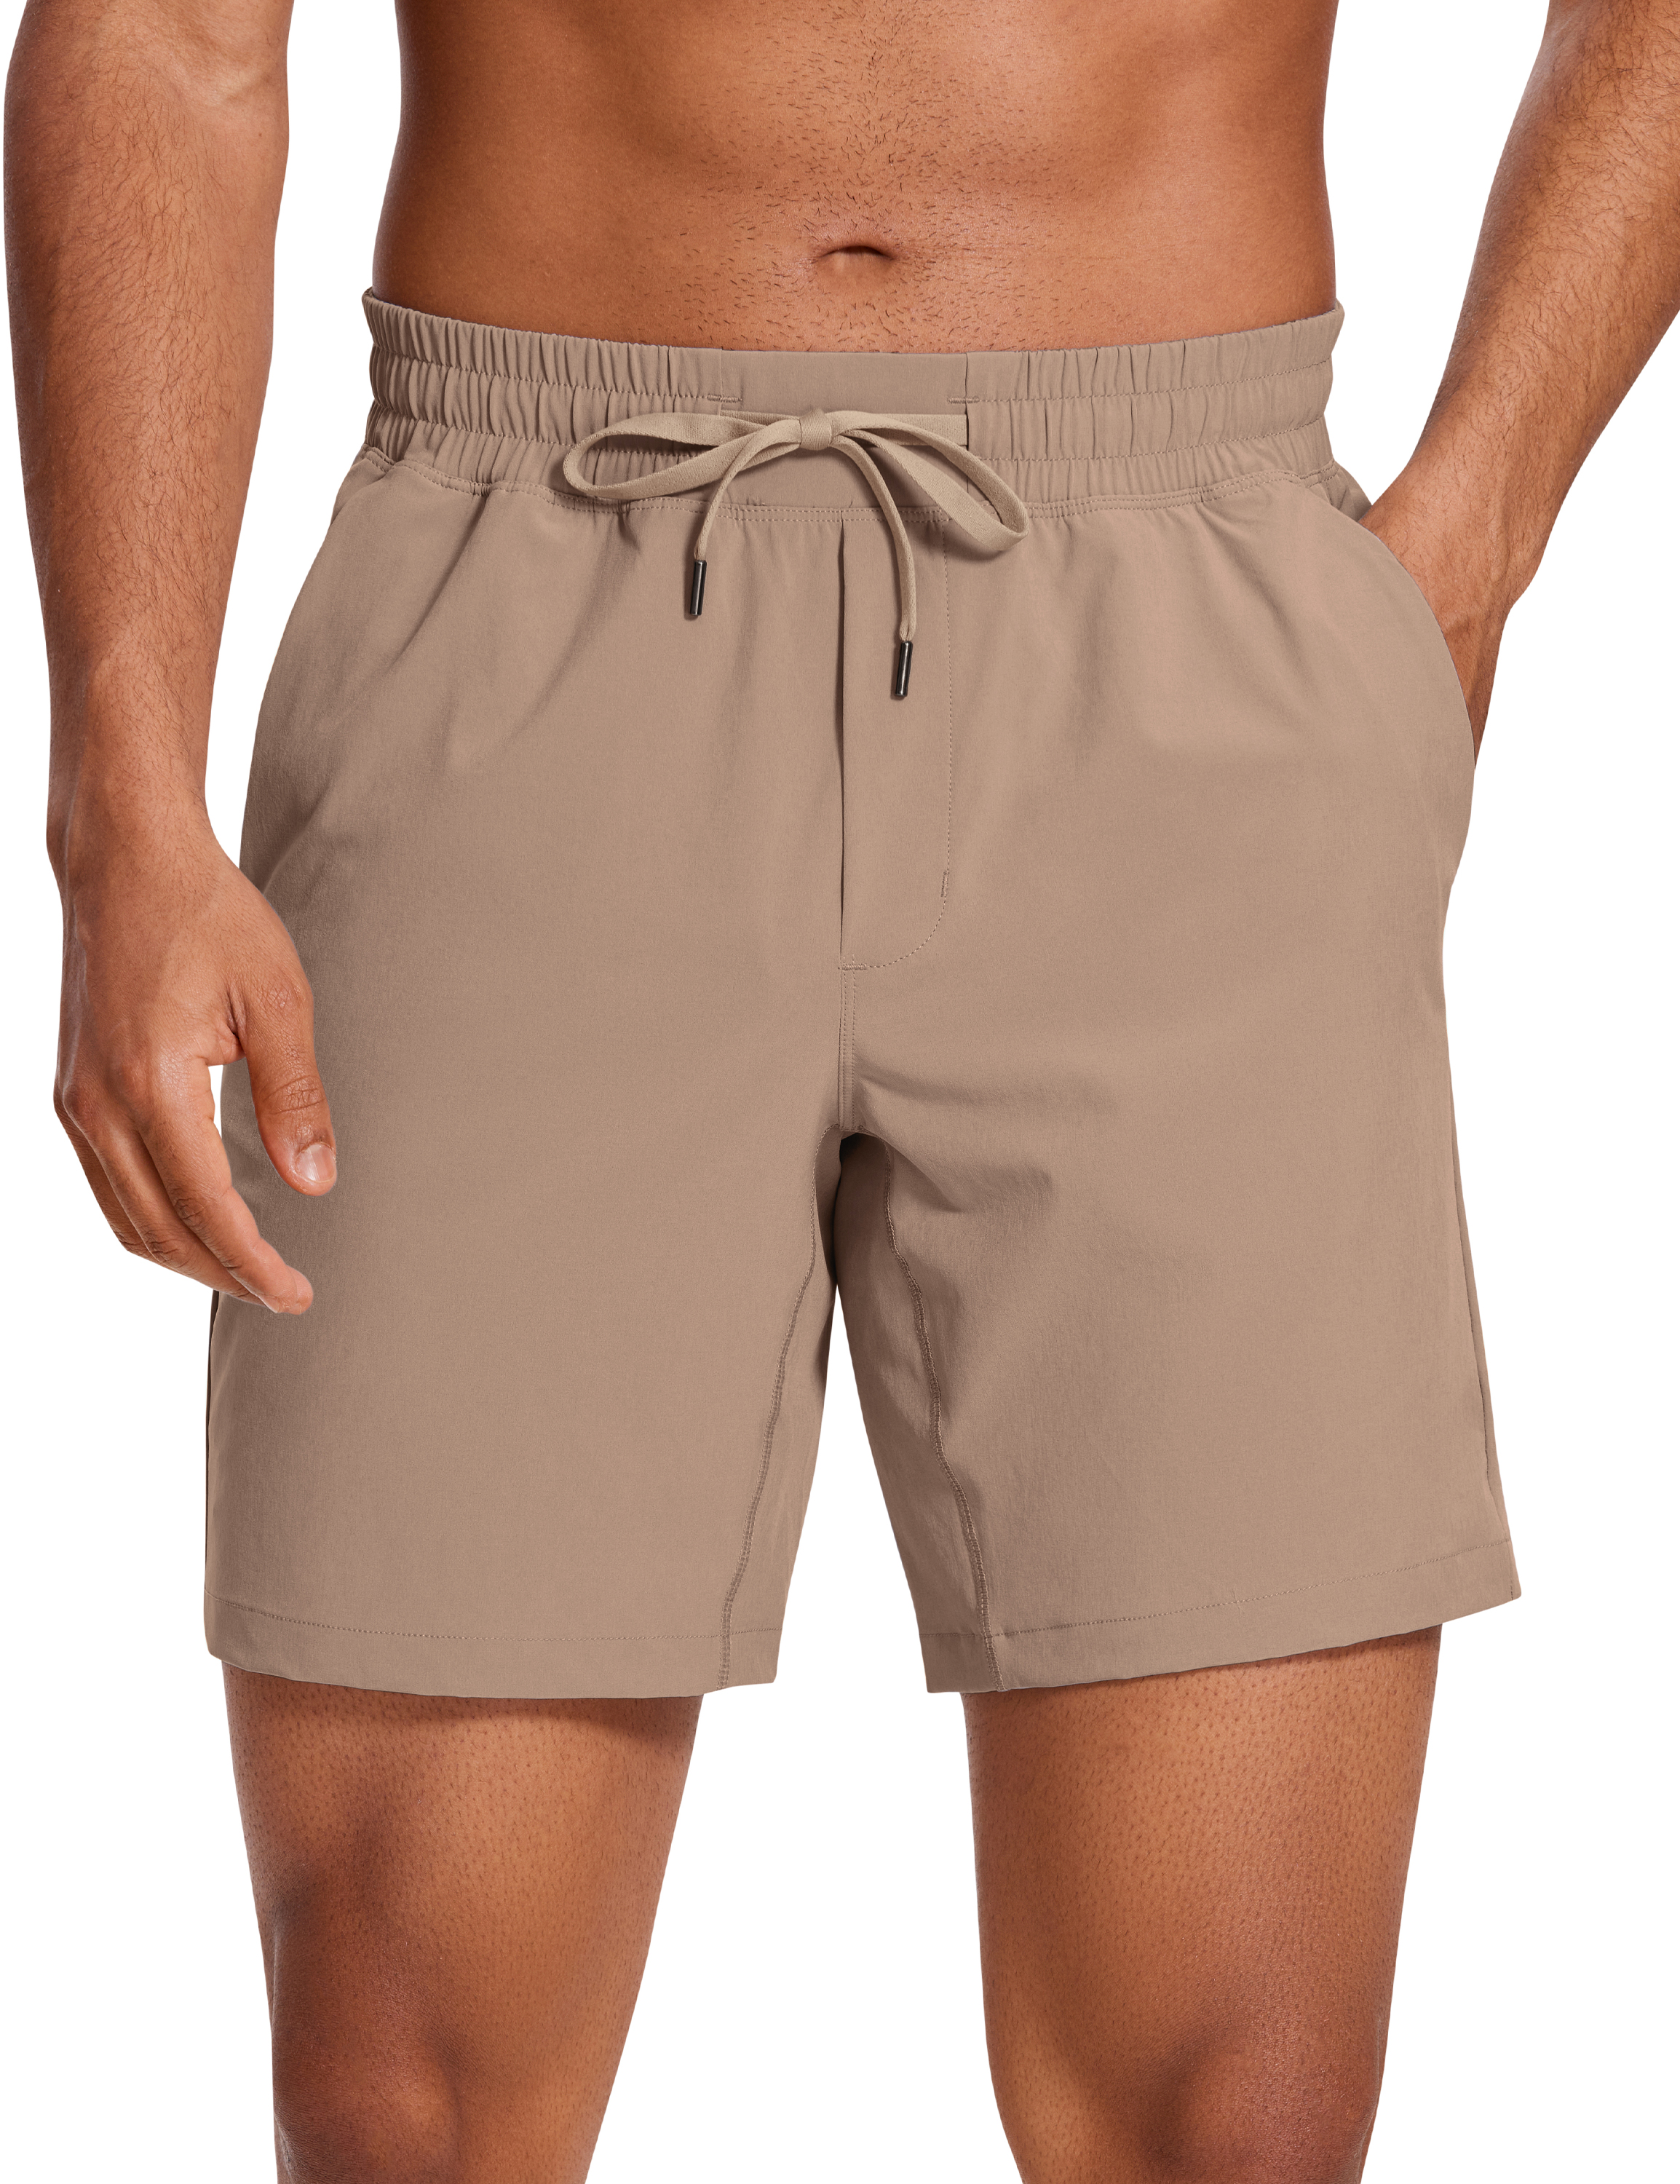 CRZ YOGA Feathery-Fit Men's 7 Inches Sports Shorts Quick Dry